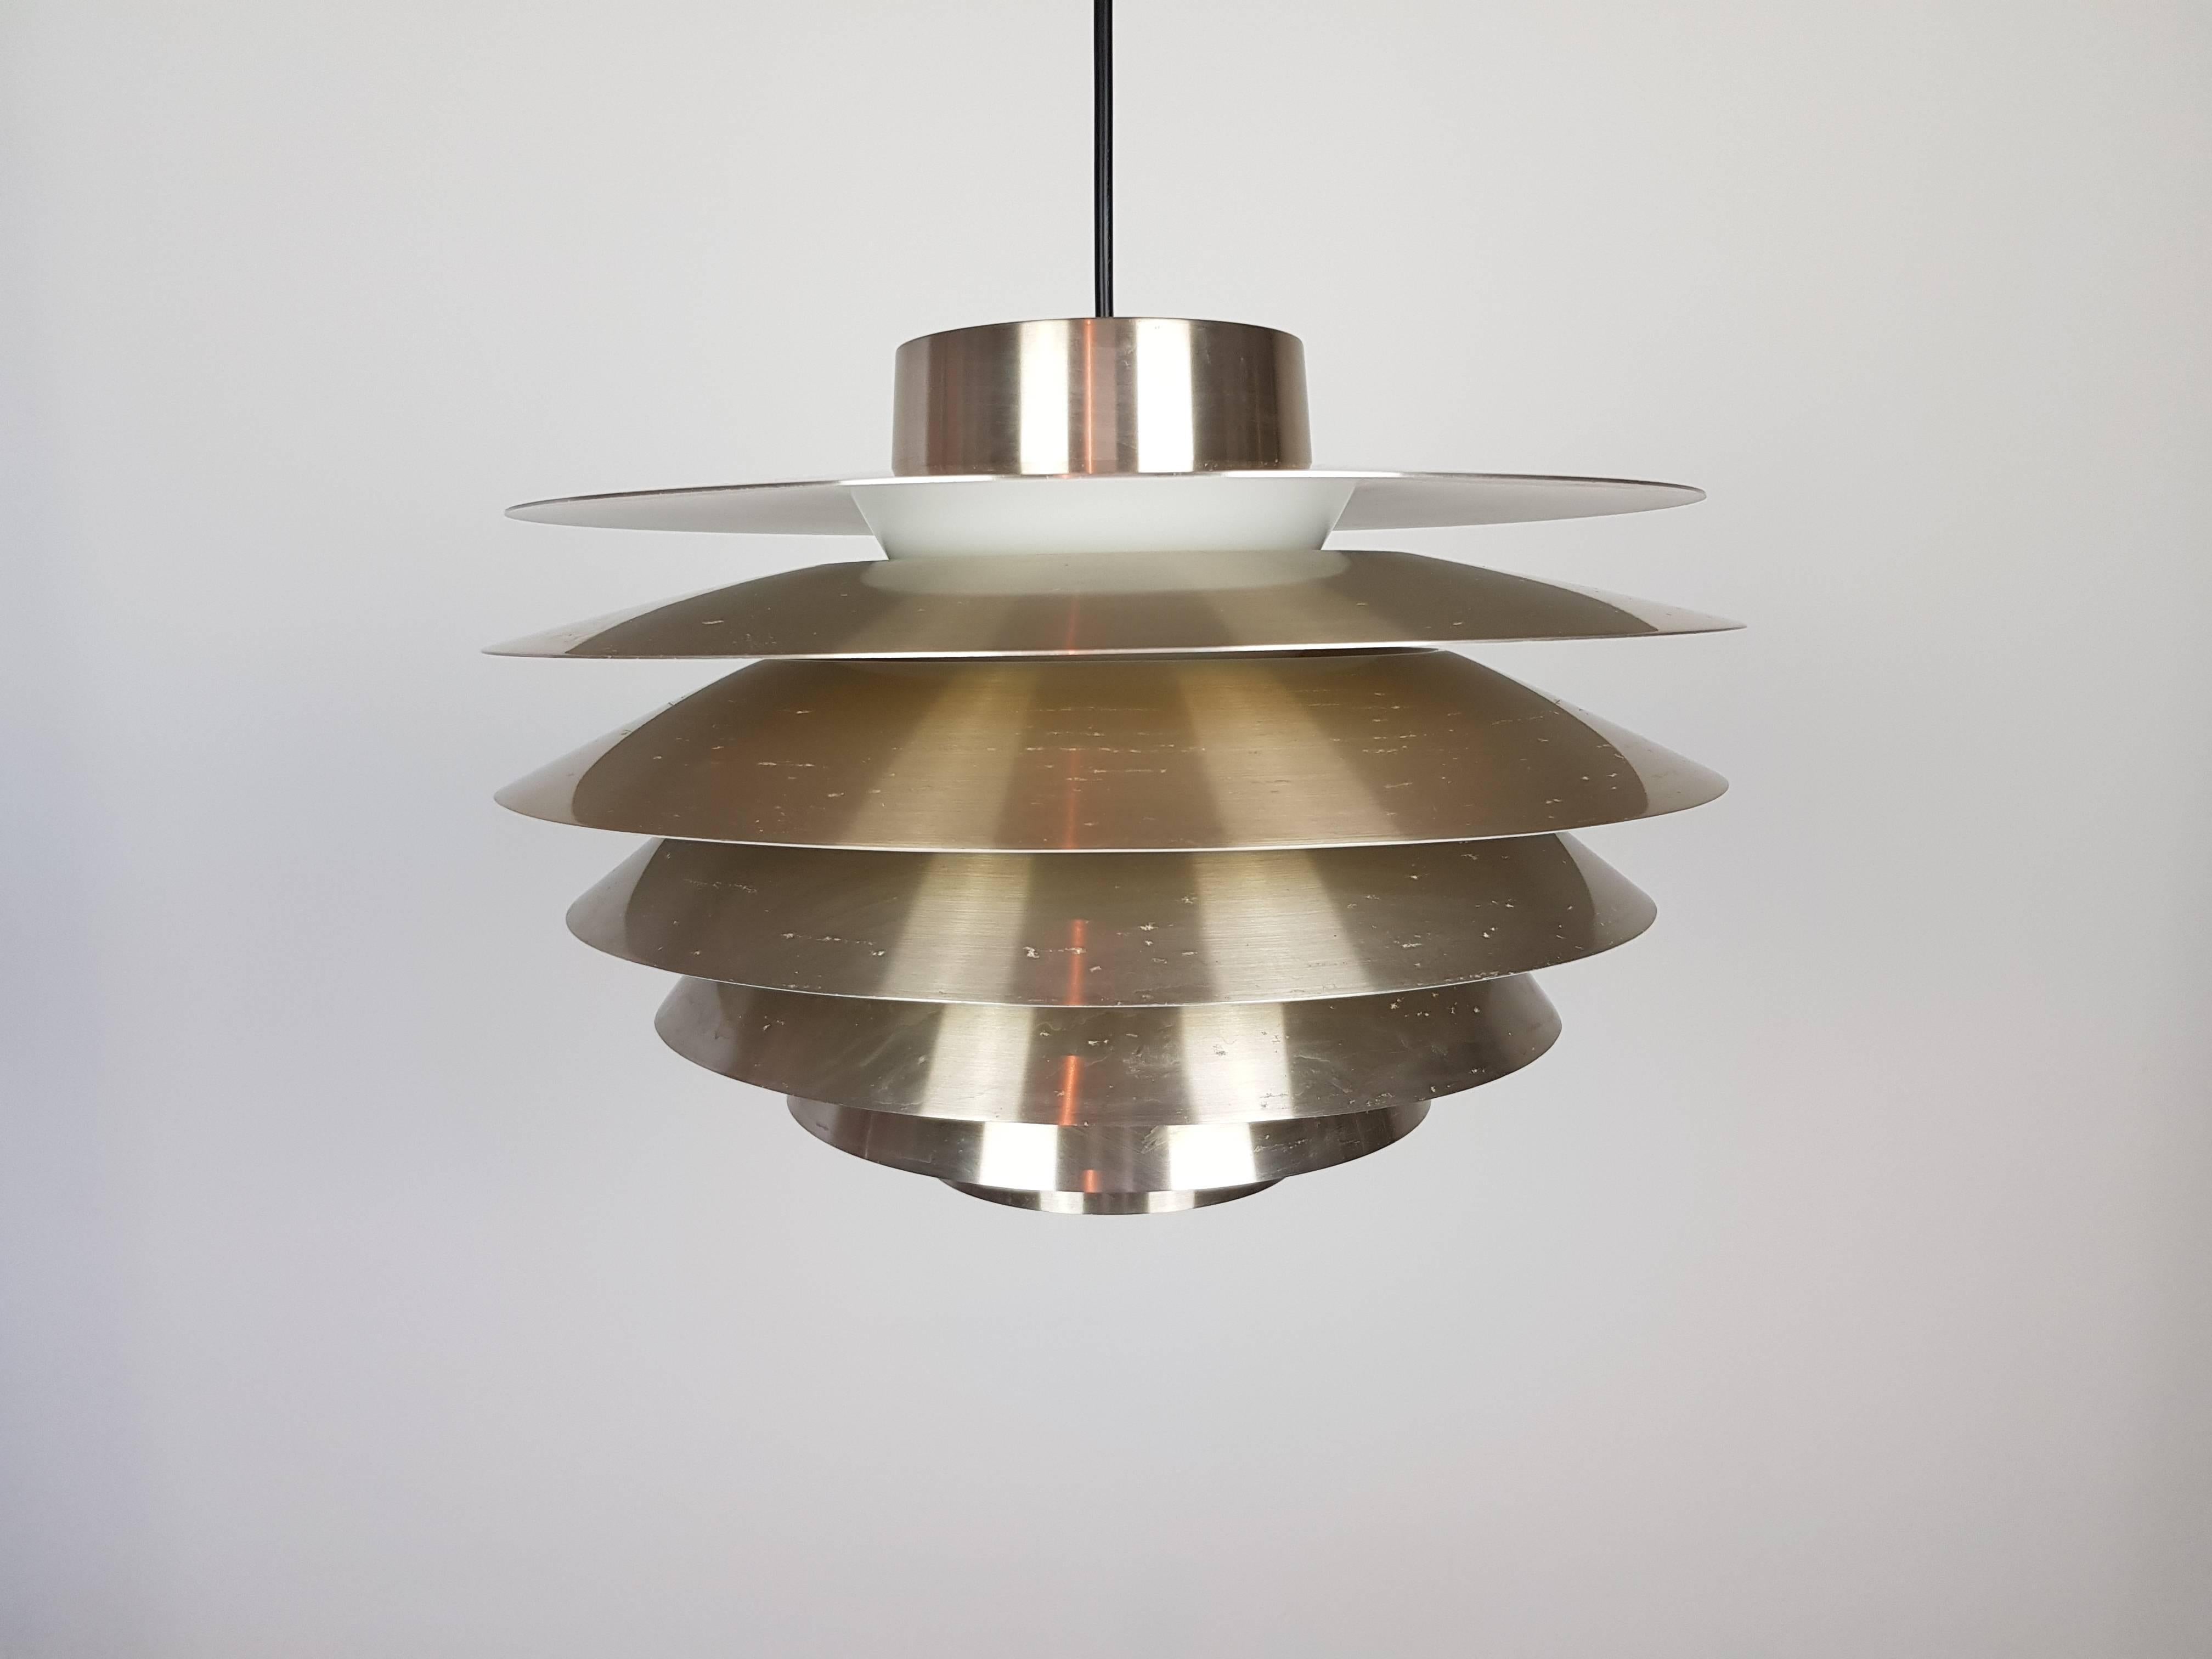 A vintage brassed Svend Middelboe Verona pendant light produced by Nordisk Solar, 1970s

Constructed from tiers of aluminium emitting a warm subtle glow when lit.

Fully working, rewired, safety tested and passed, supplied with a contemporary